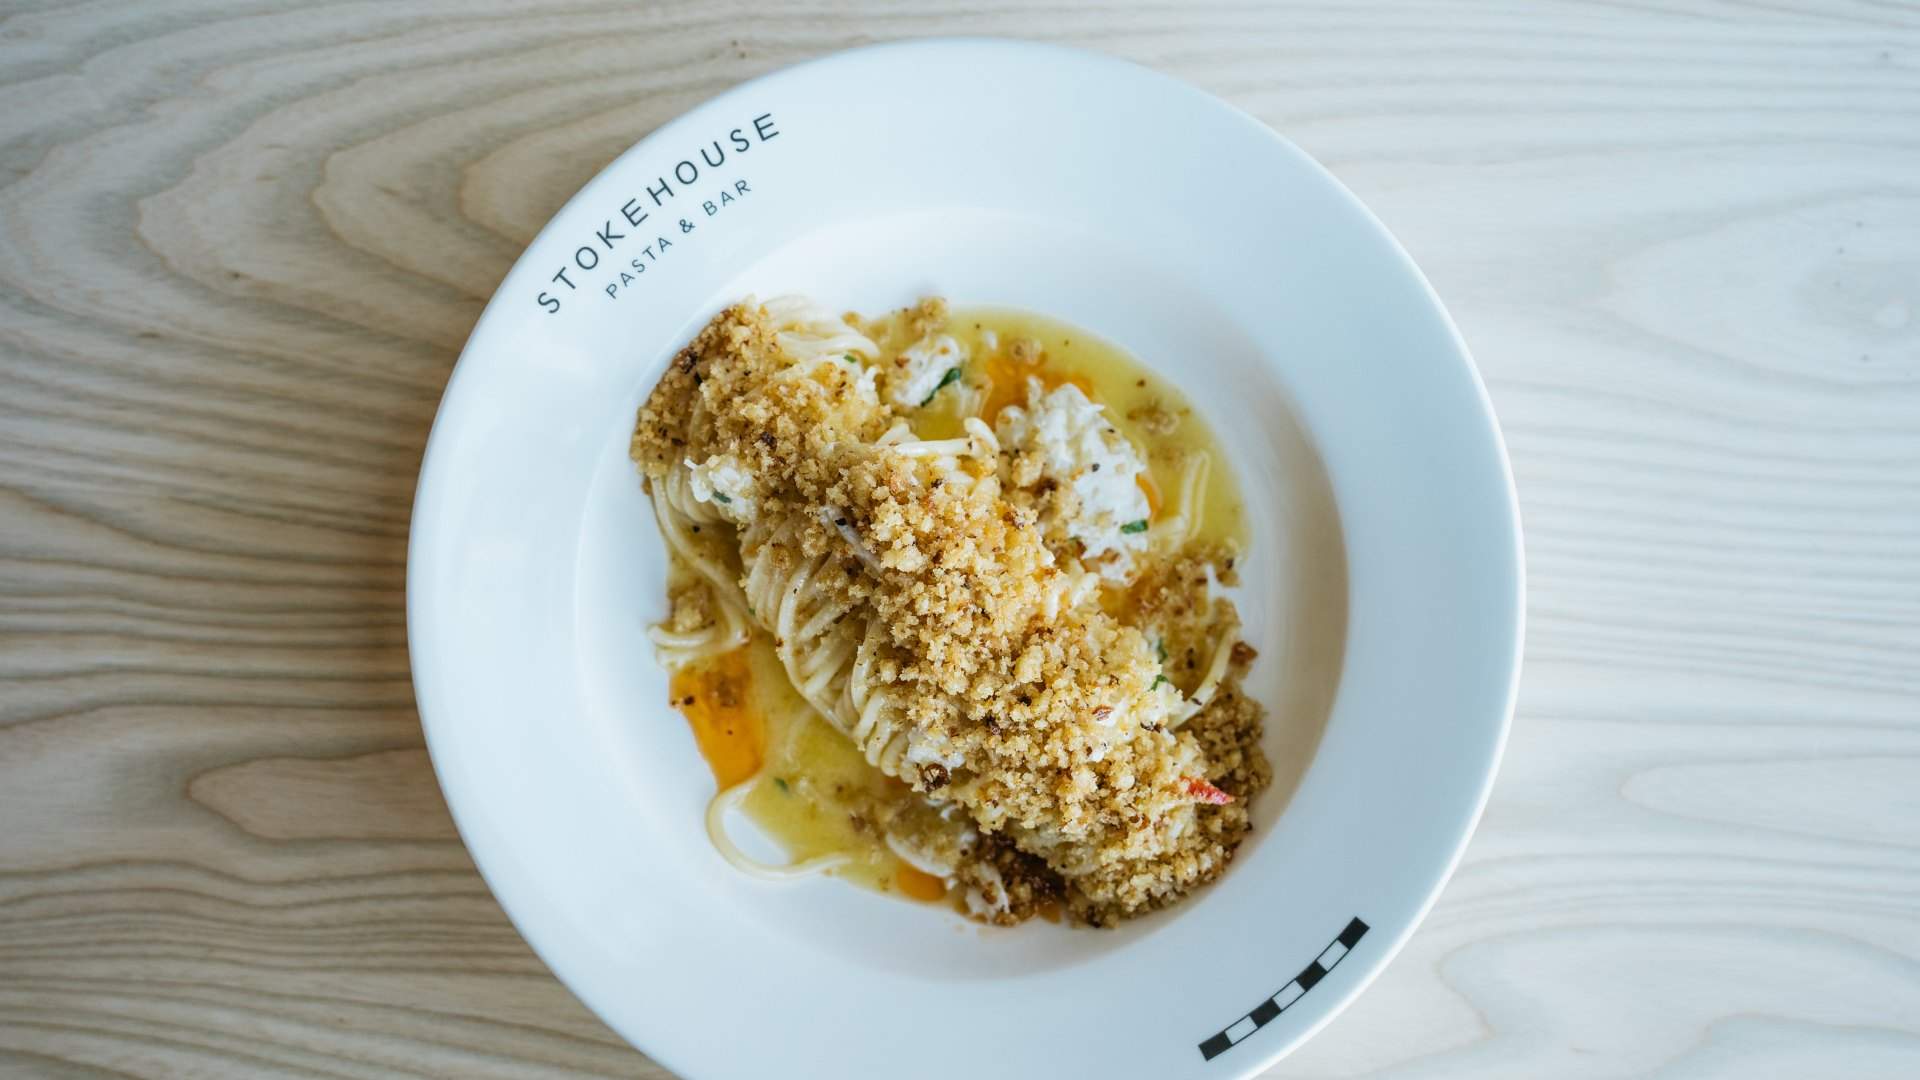 the crab spaghetti at Stokehouse Pasta and Bar in St Kilda, Melbourne - home to the best pasta in melbourne